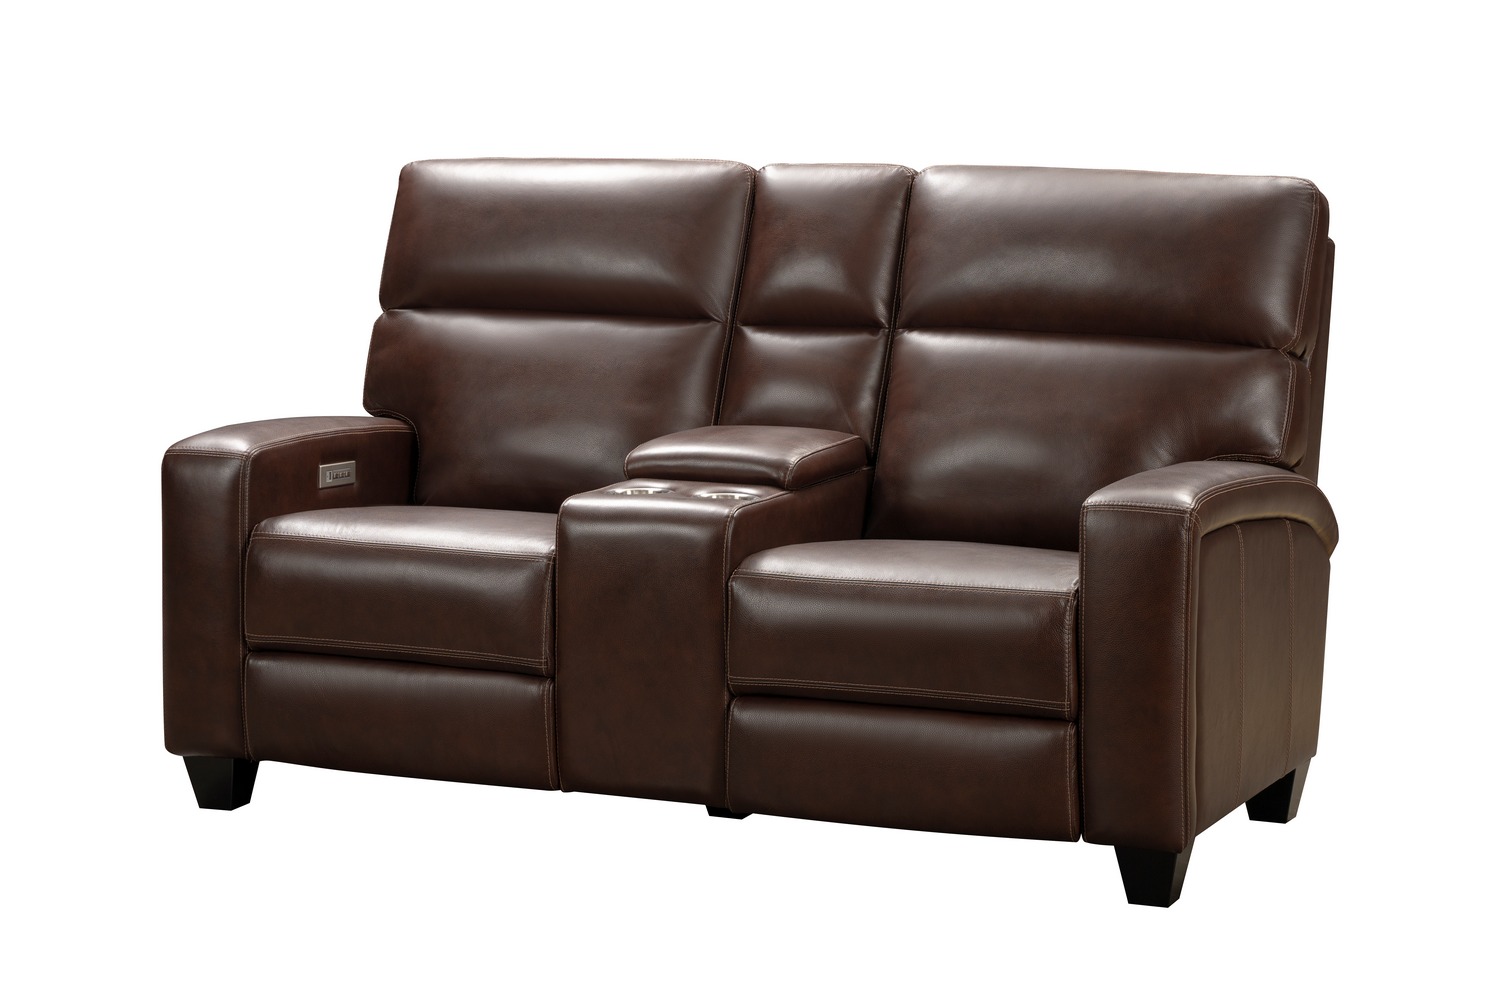 Barcalounger Macello Power Reclining Console Loveseat with Power Head Rests and Power Lumbar - Castleton Rustic Brown/Leather Match